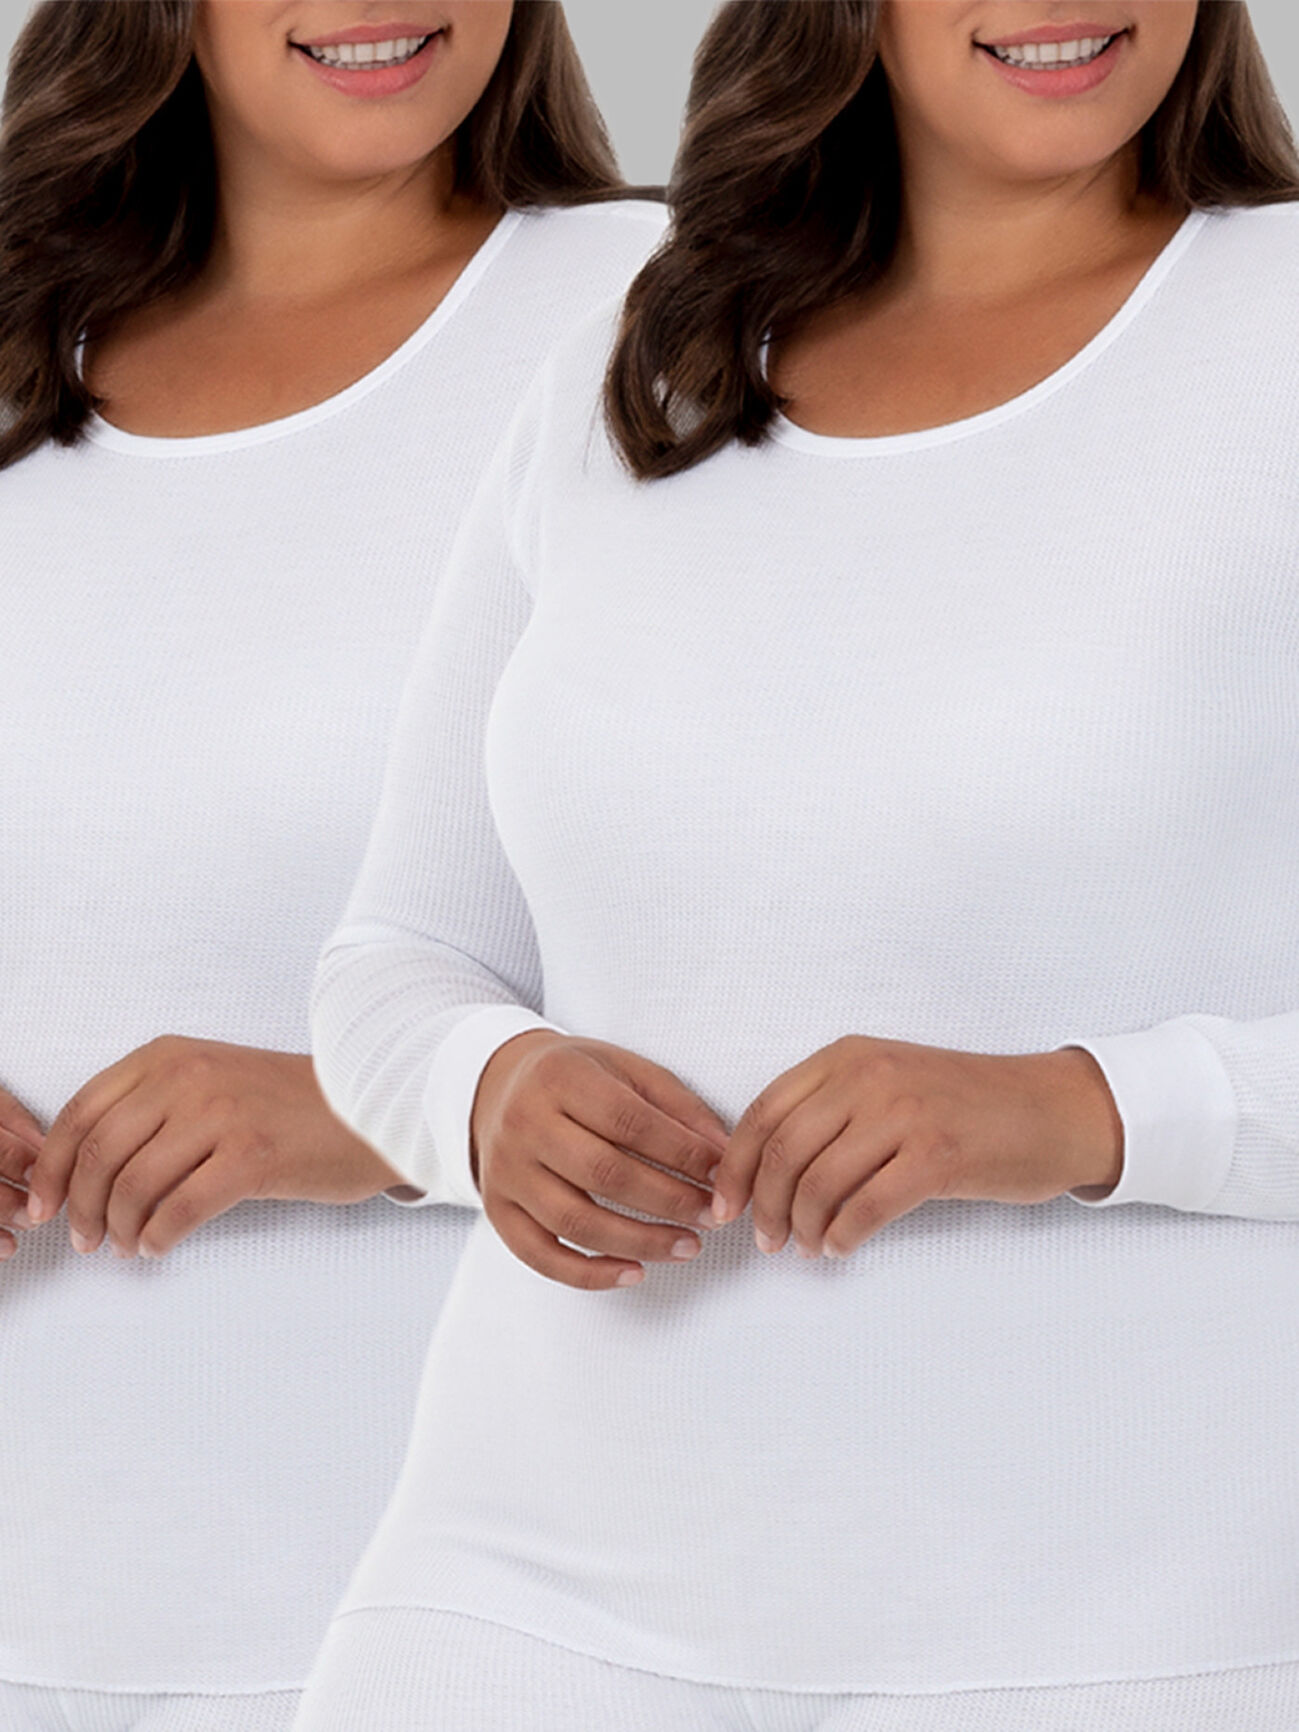 Women's Plus Size Thermal Crew Top, 2 Pack WHITE/WHITE